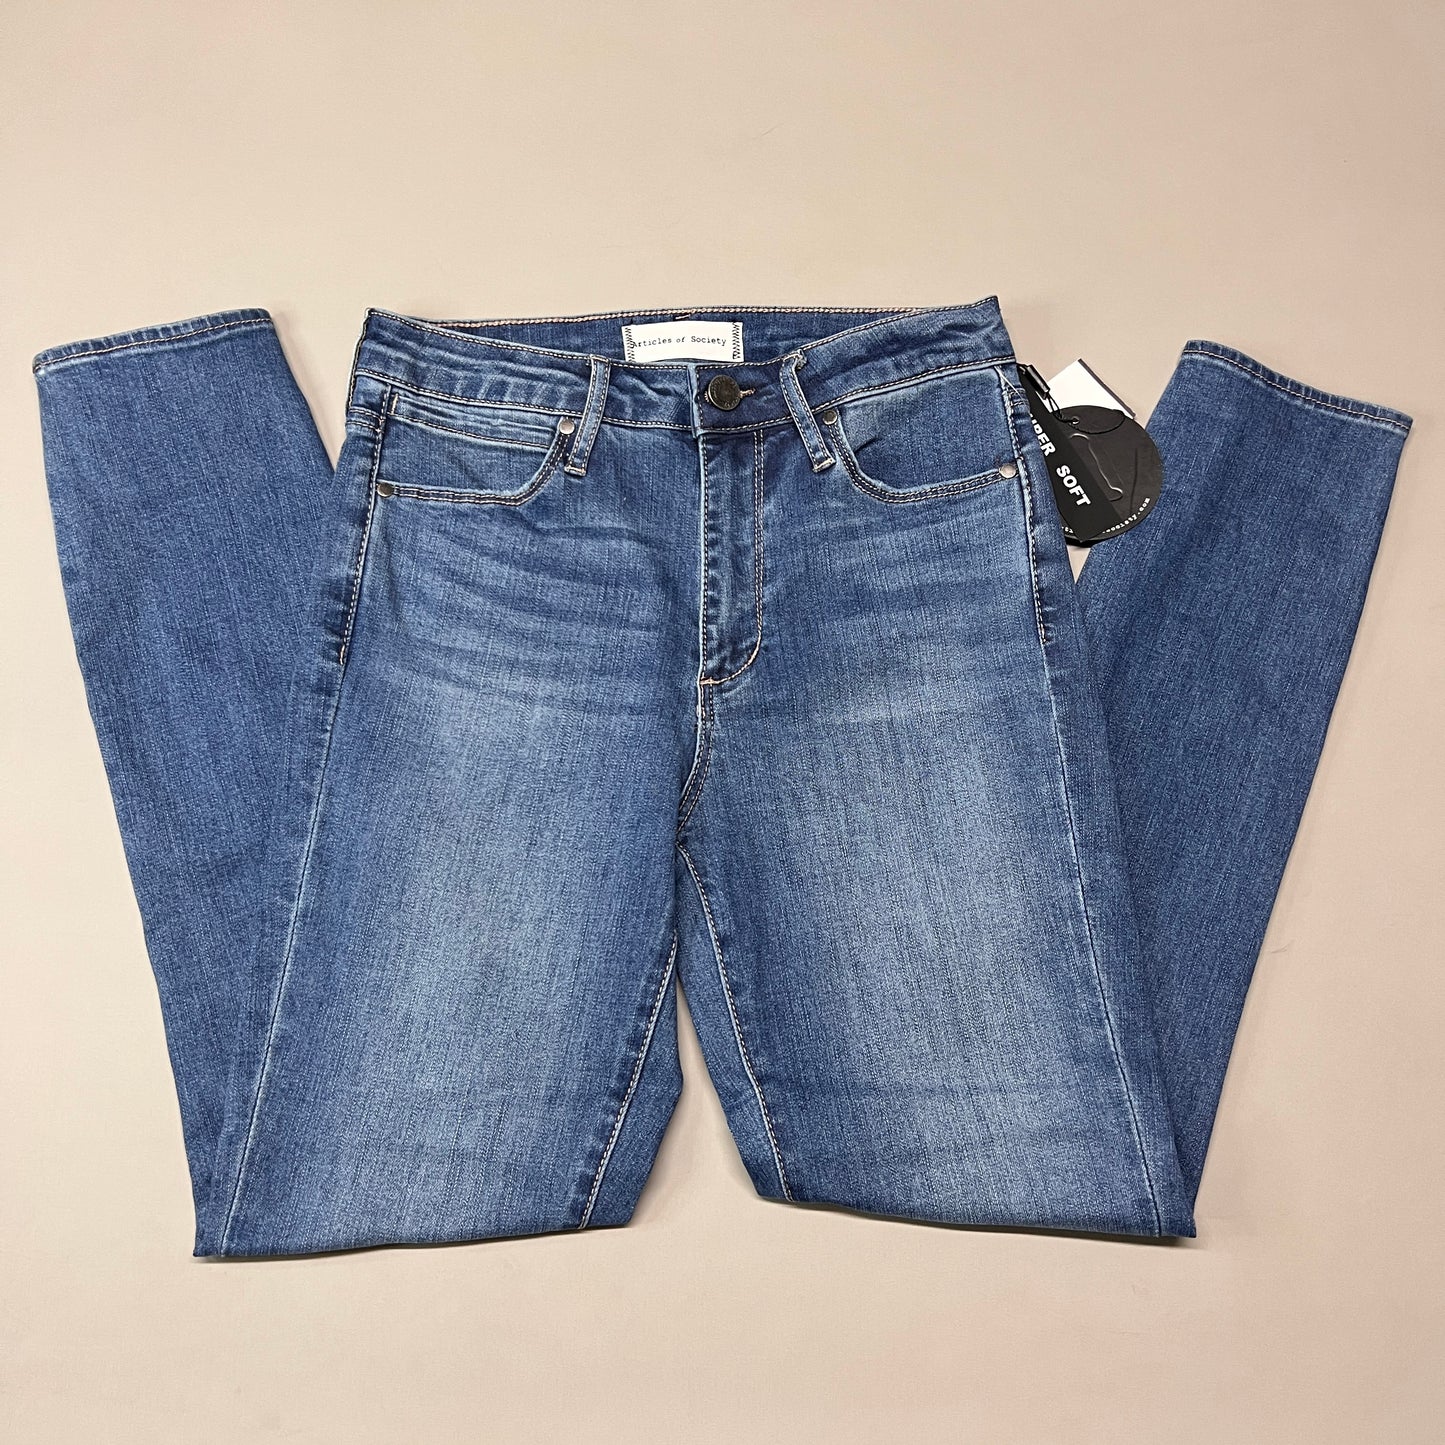 ARTICLES OF SOCIETY Pearl City Denim Jeans Women's Sz 25 Blue 4018PLV-712 (New)